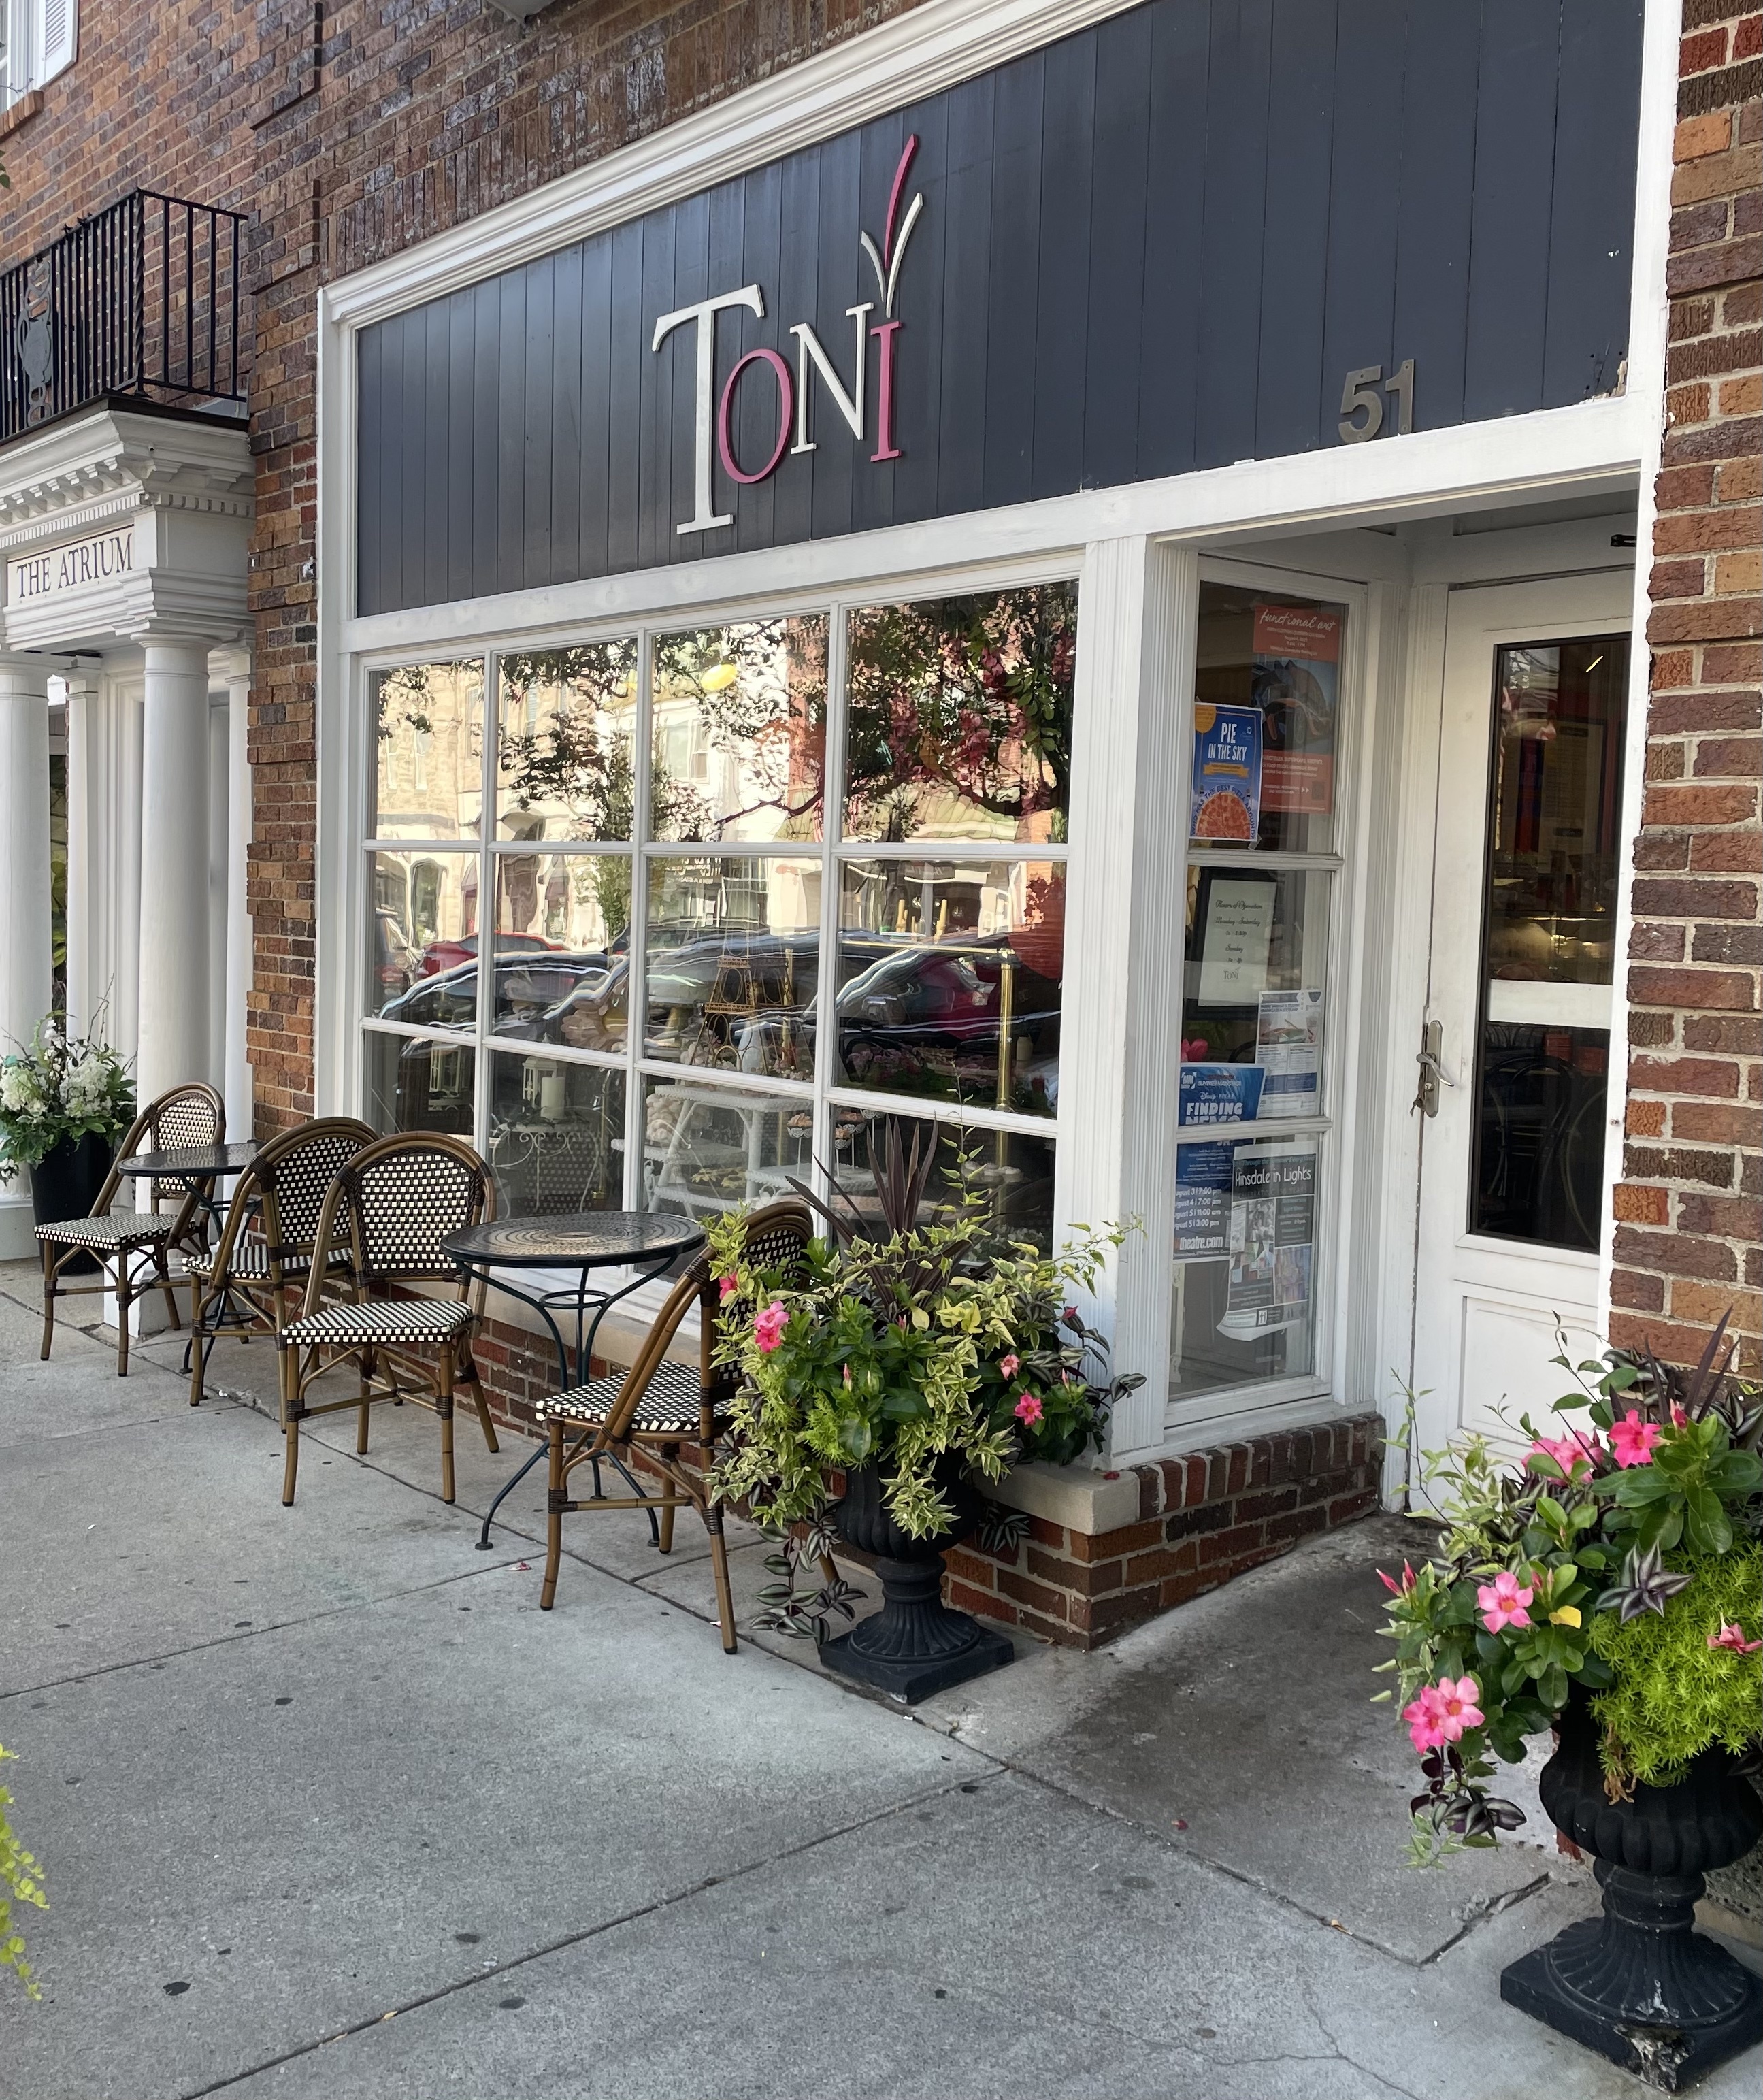 The exterior of Toni Patisserie in Hinsdale, IL